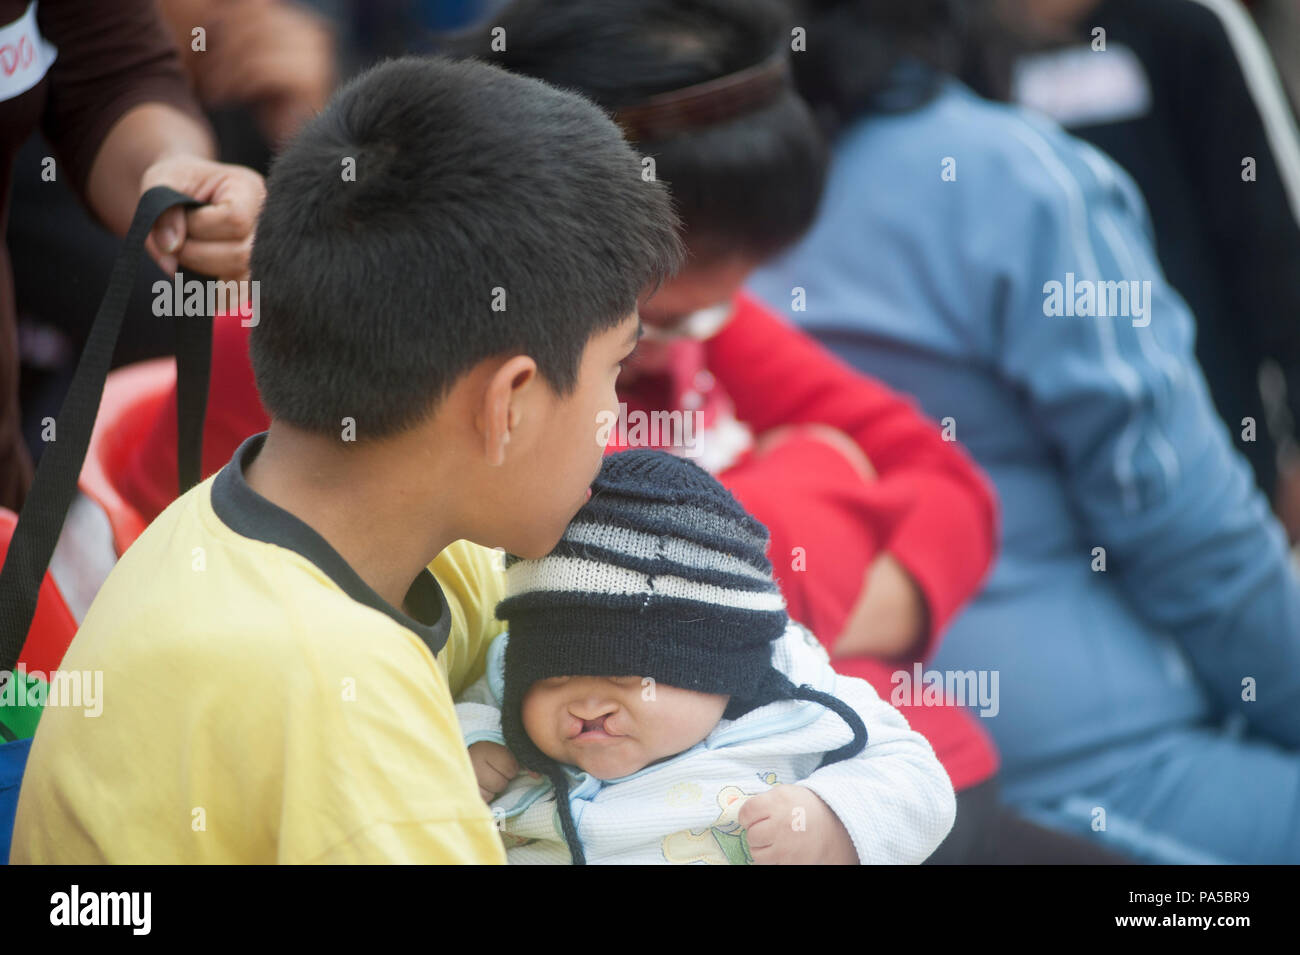 Family of cleft lip, brothers. Children with chullo waiting embraced. Stock Photo